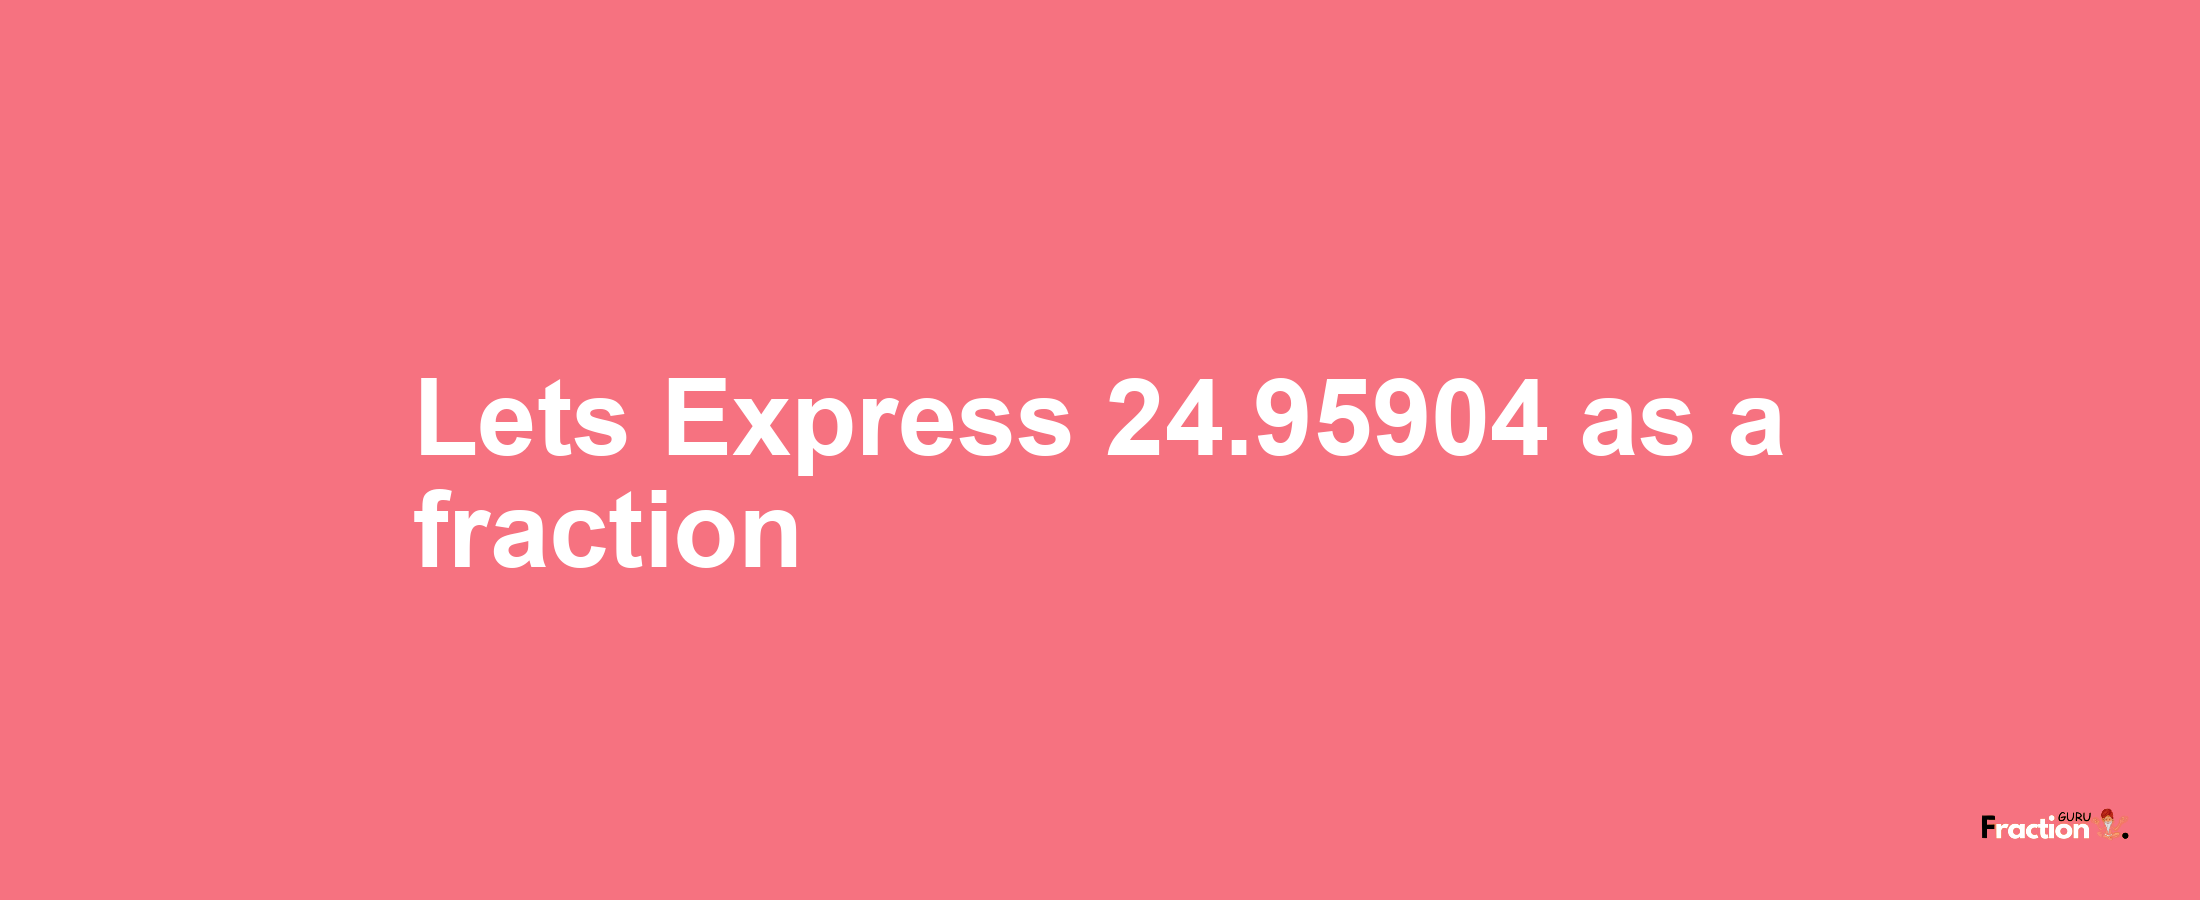 Lets Express 24.95904 as afraction